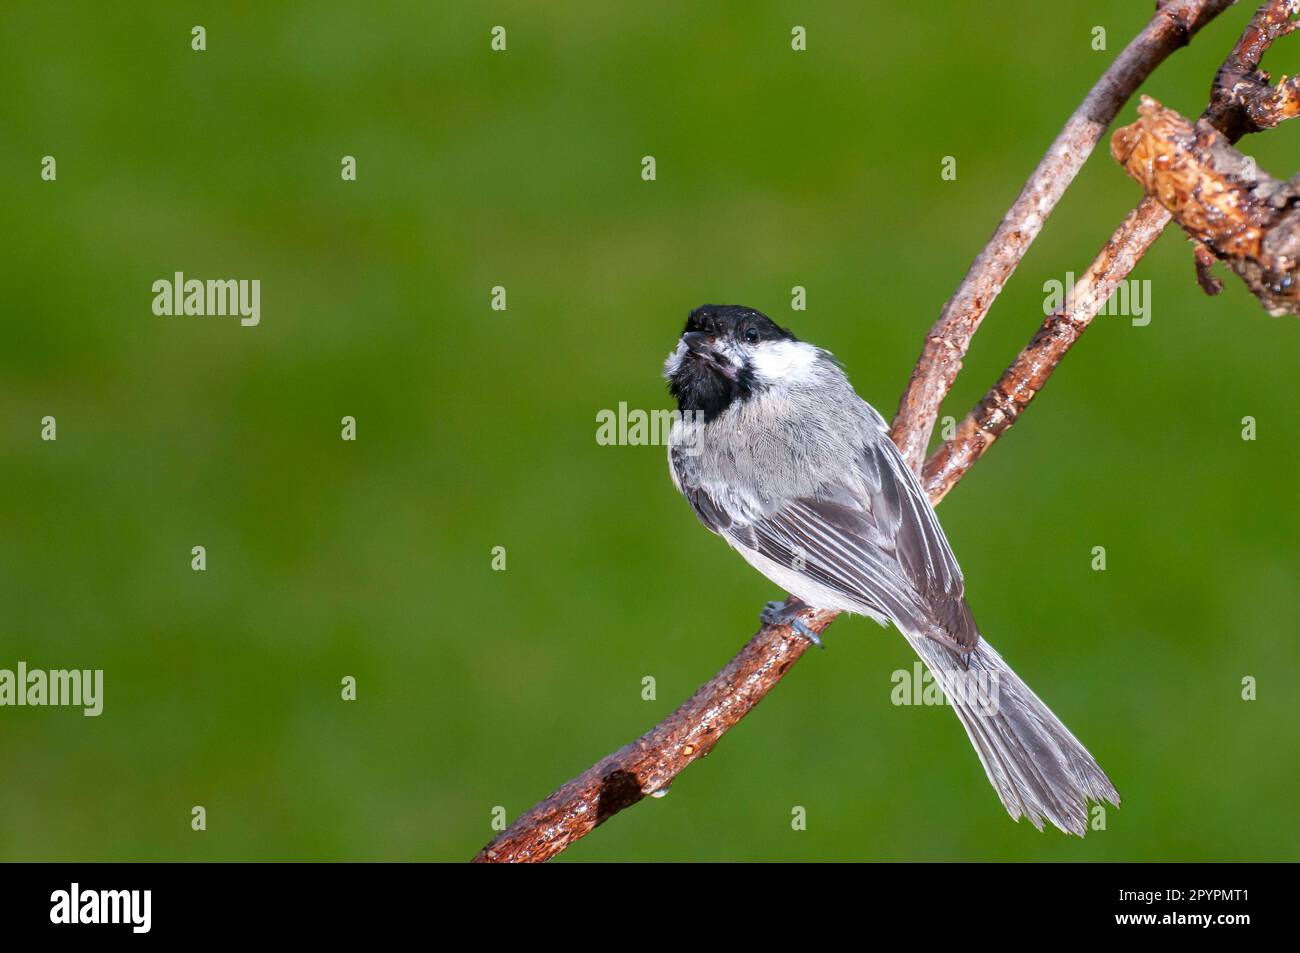 Vadnais Heights, Minnesota.  Black-capped Chickadee, Poecile atricapillus perched on a branch with a beautiful green background. Stock Photo